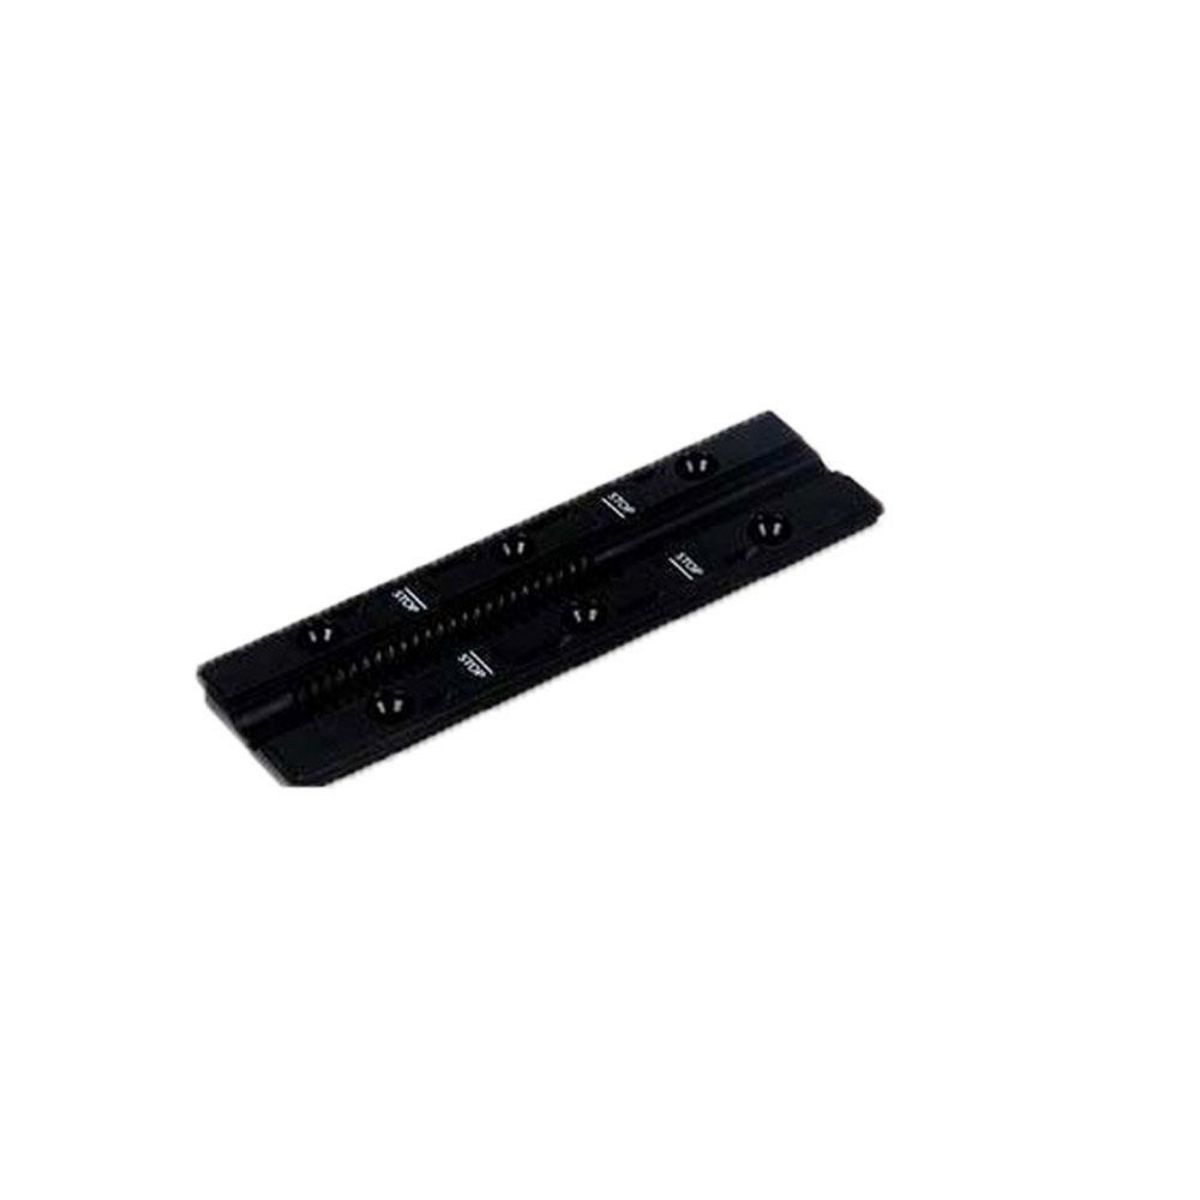 Vipec-12-Guiding-plate-60